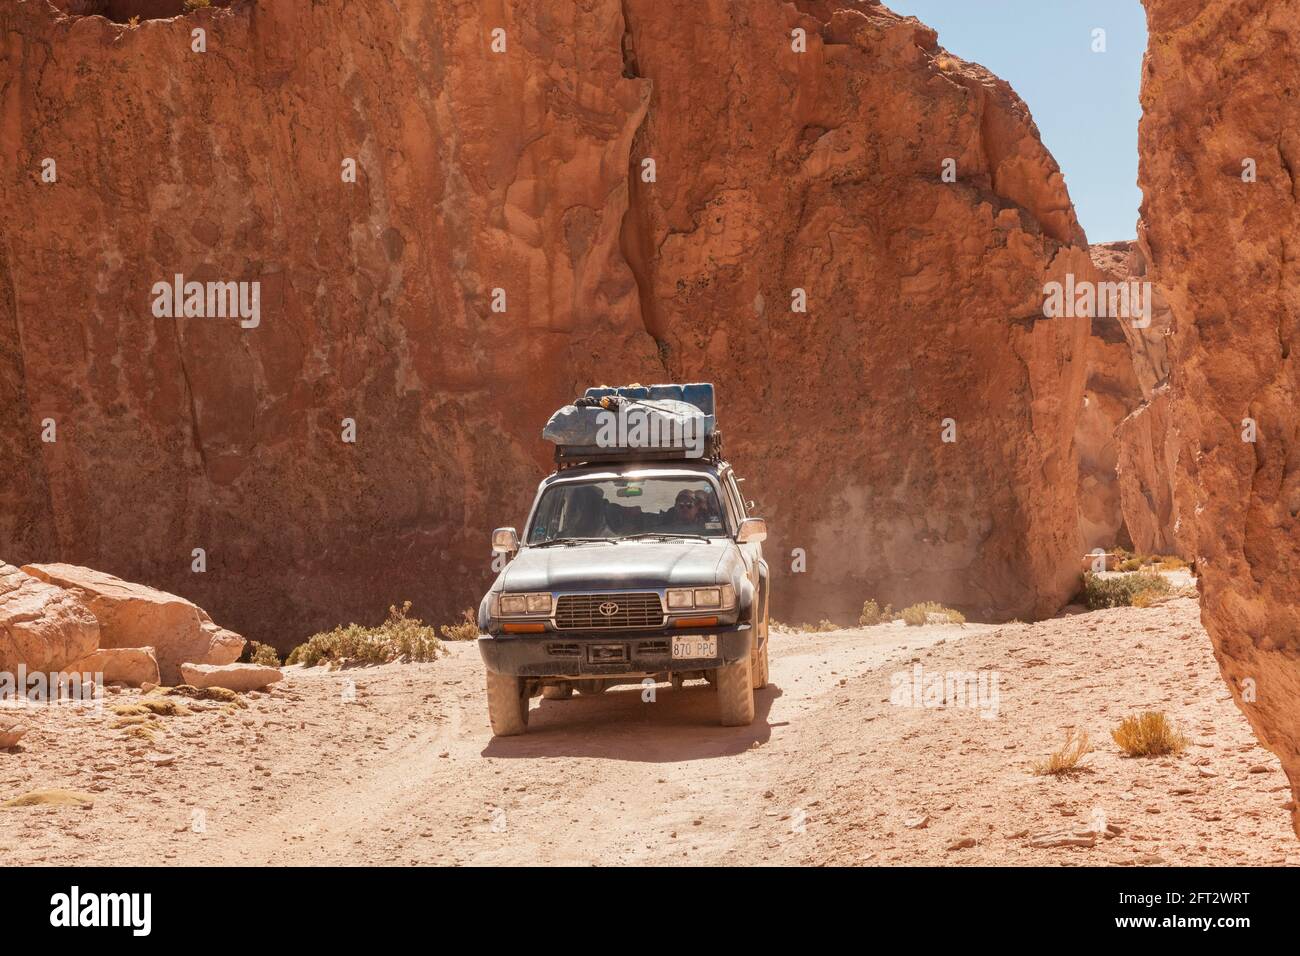 An SUV 4x4 vehicle negotiates a rocky canyon in the Bolivian desert Stock Photo